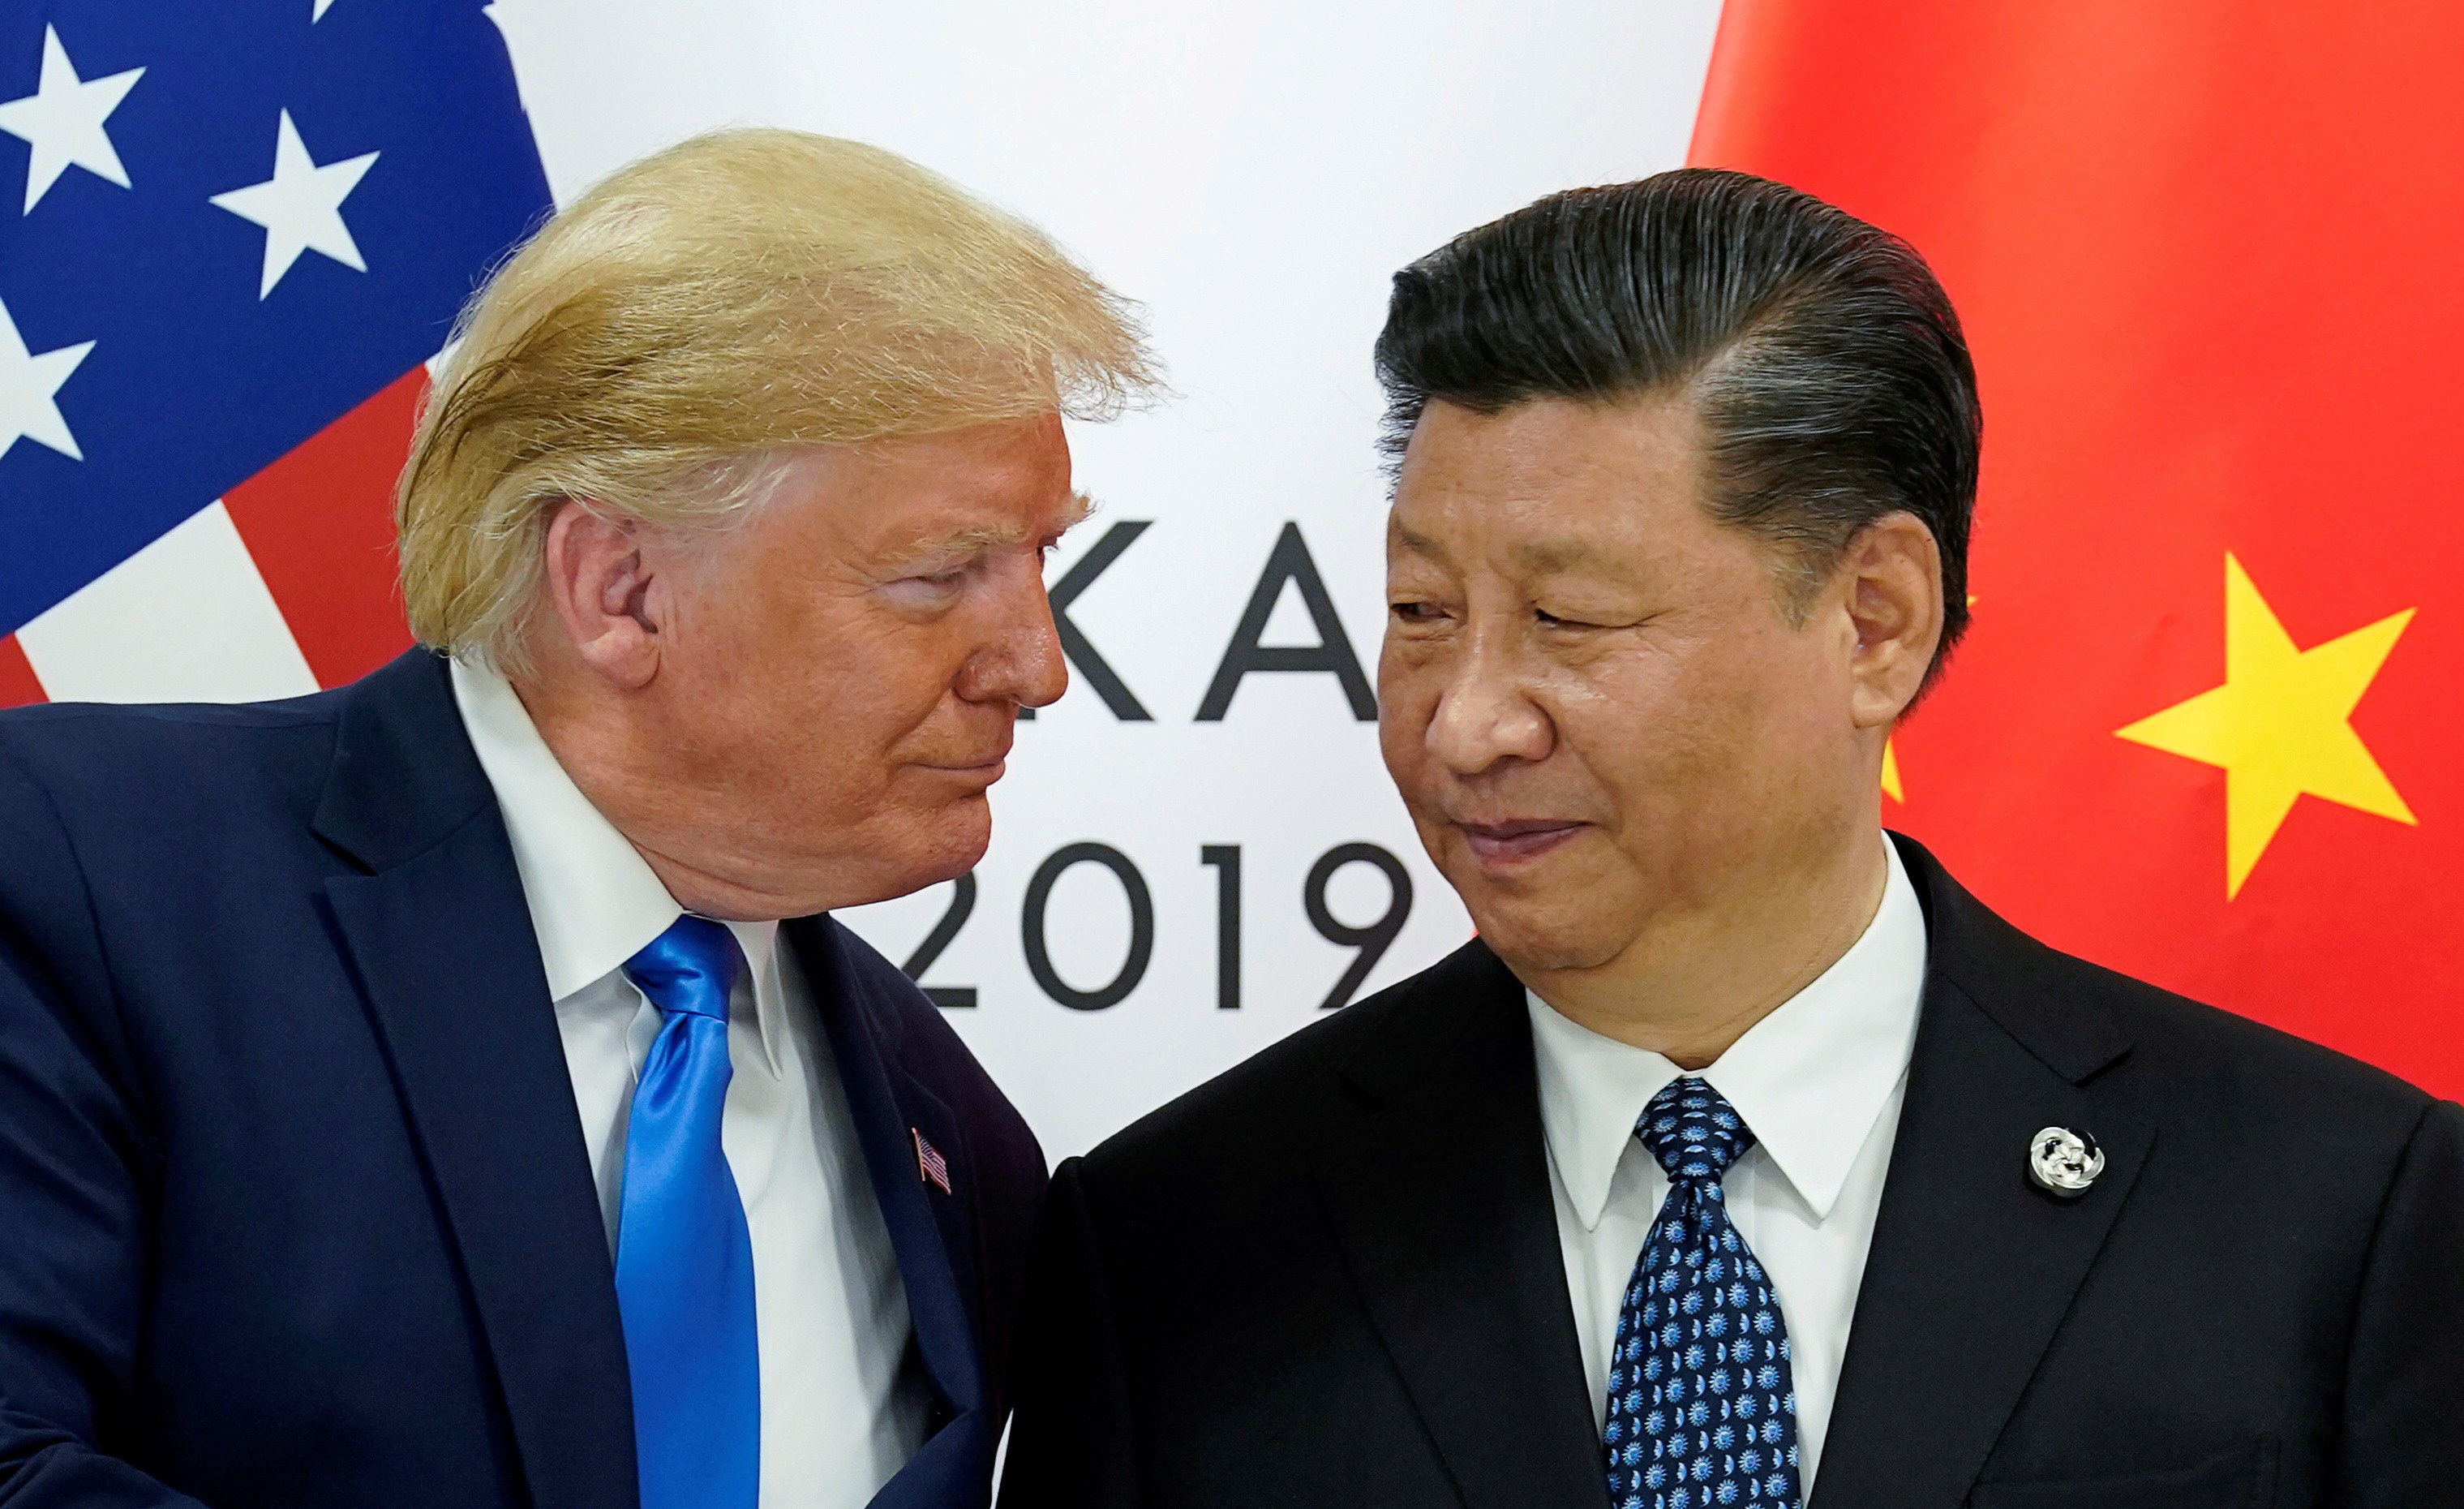 US President Donald Trump meets Chinese President Xi Jinping at the start of their bilateral meeting at the G20 leaders summit in Osaka on June 29. Photo: Reuters